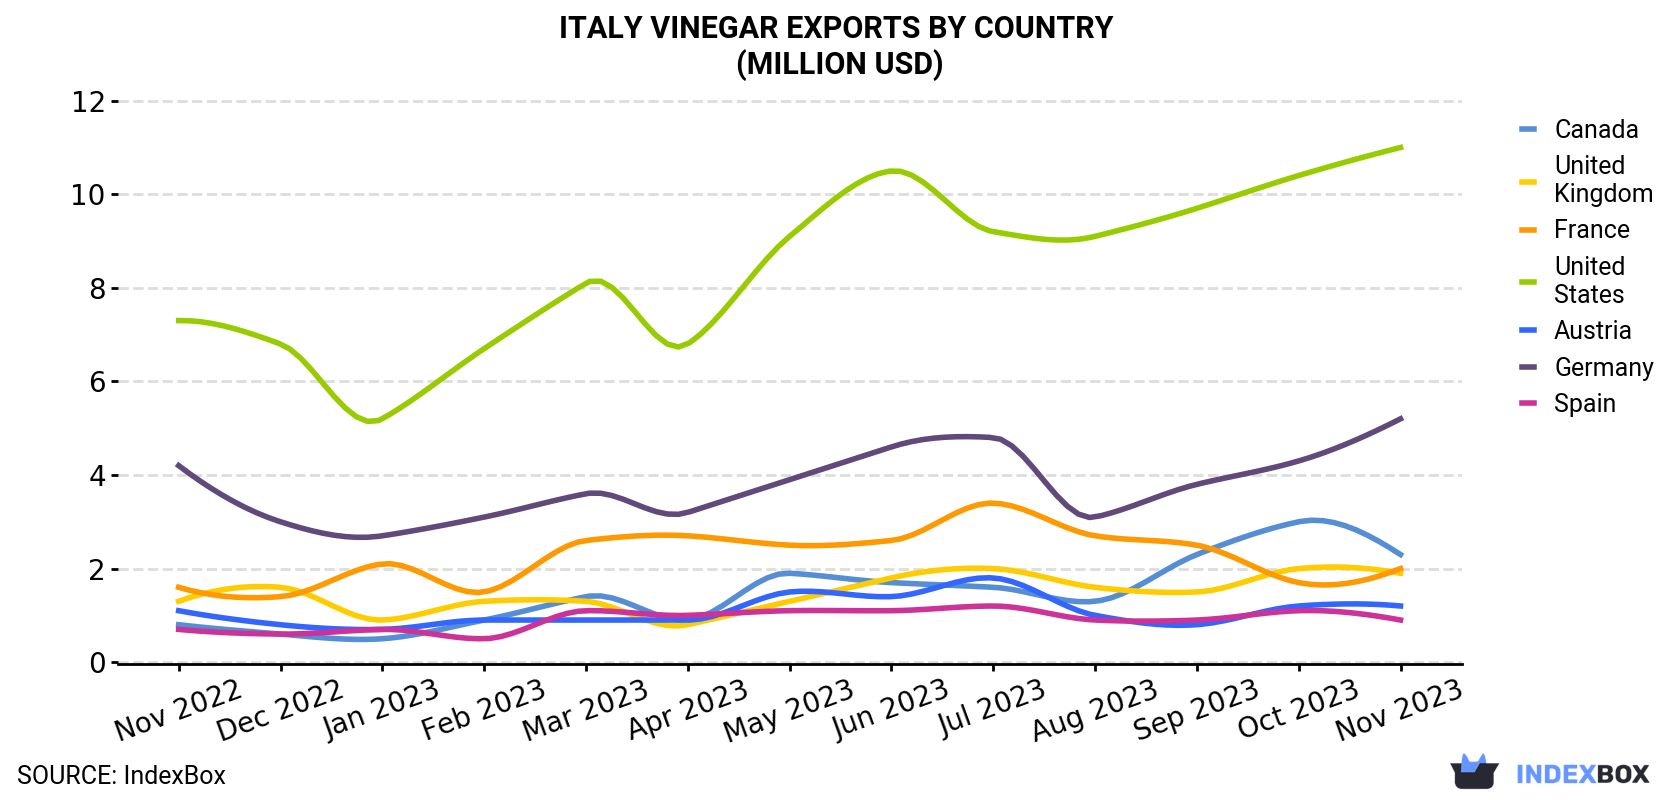 Italy Vinegar Exports By Country (Million USD)